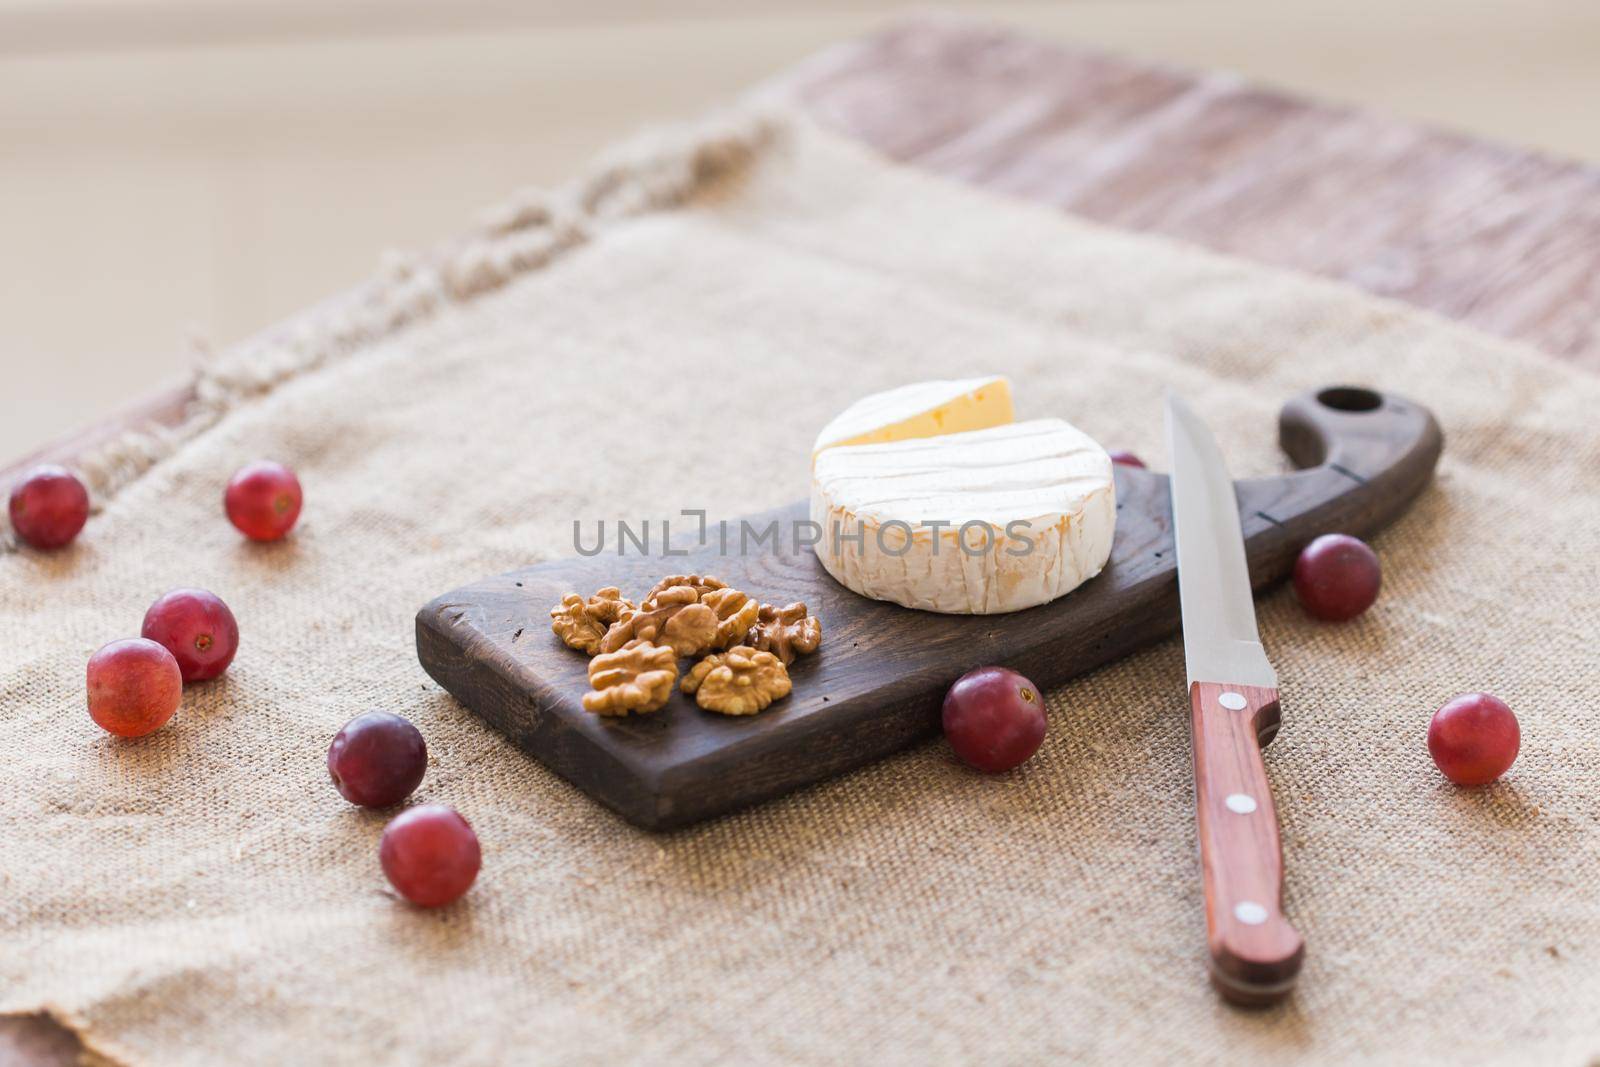 Brie or camembert cheese with nuts and grapes on a wooden board.